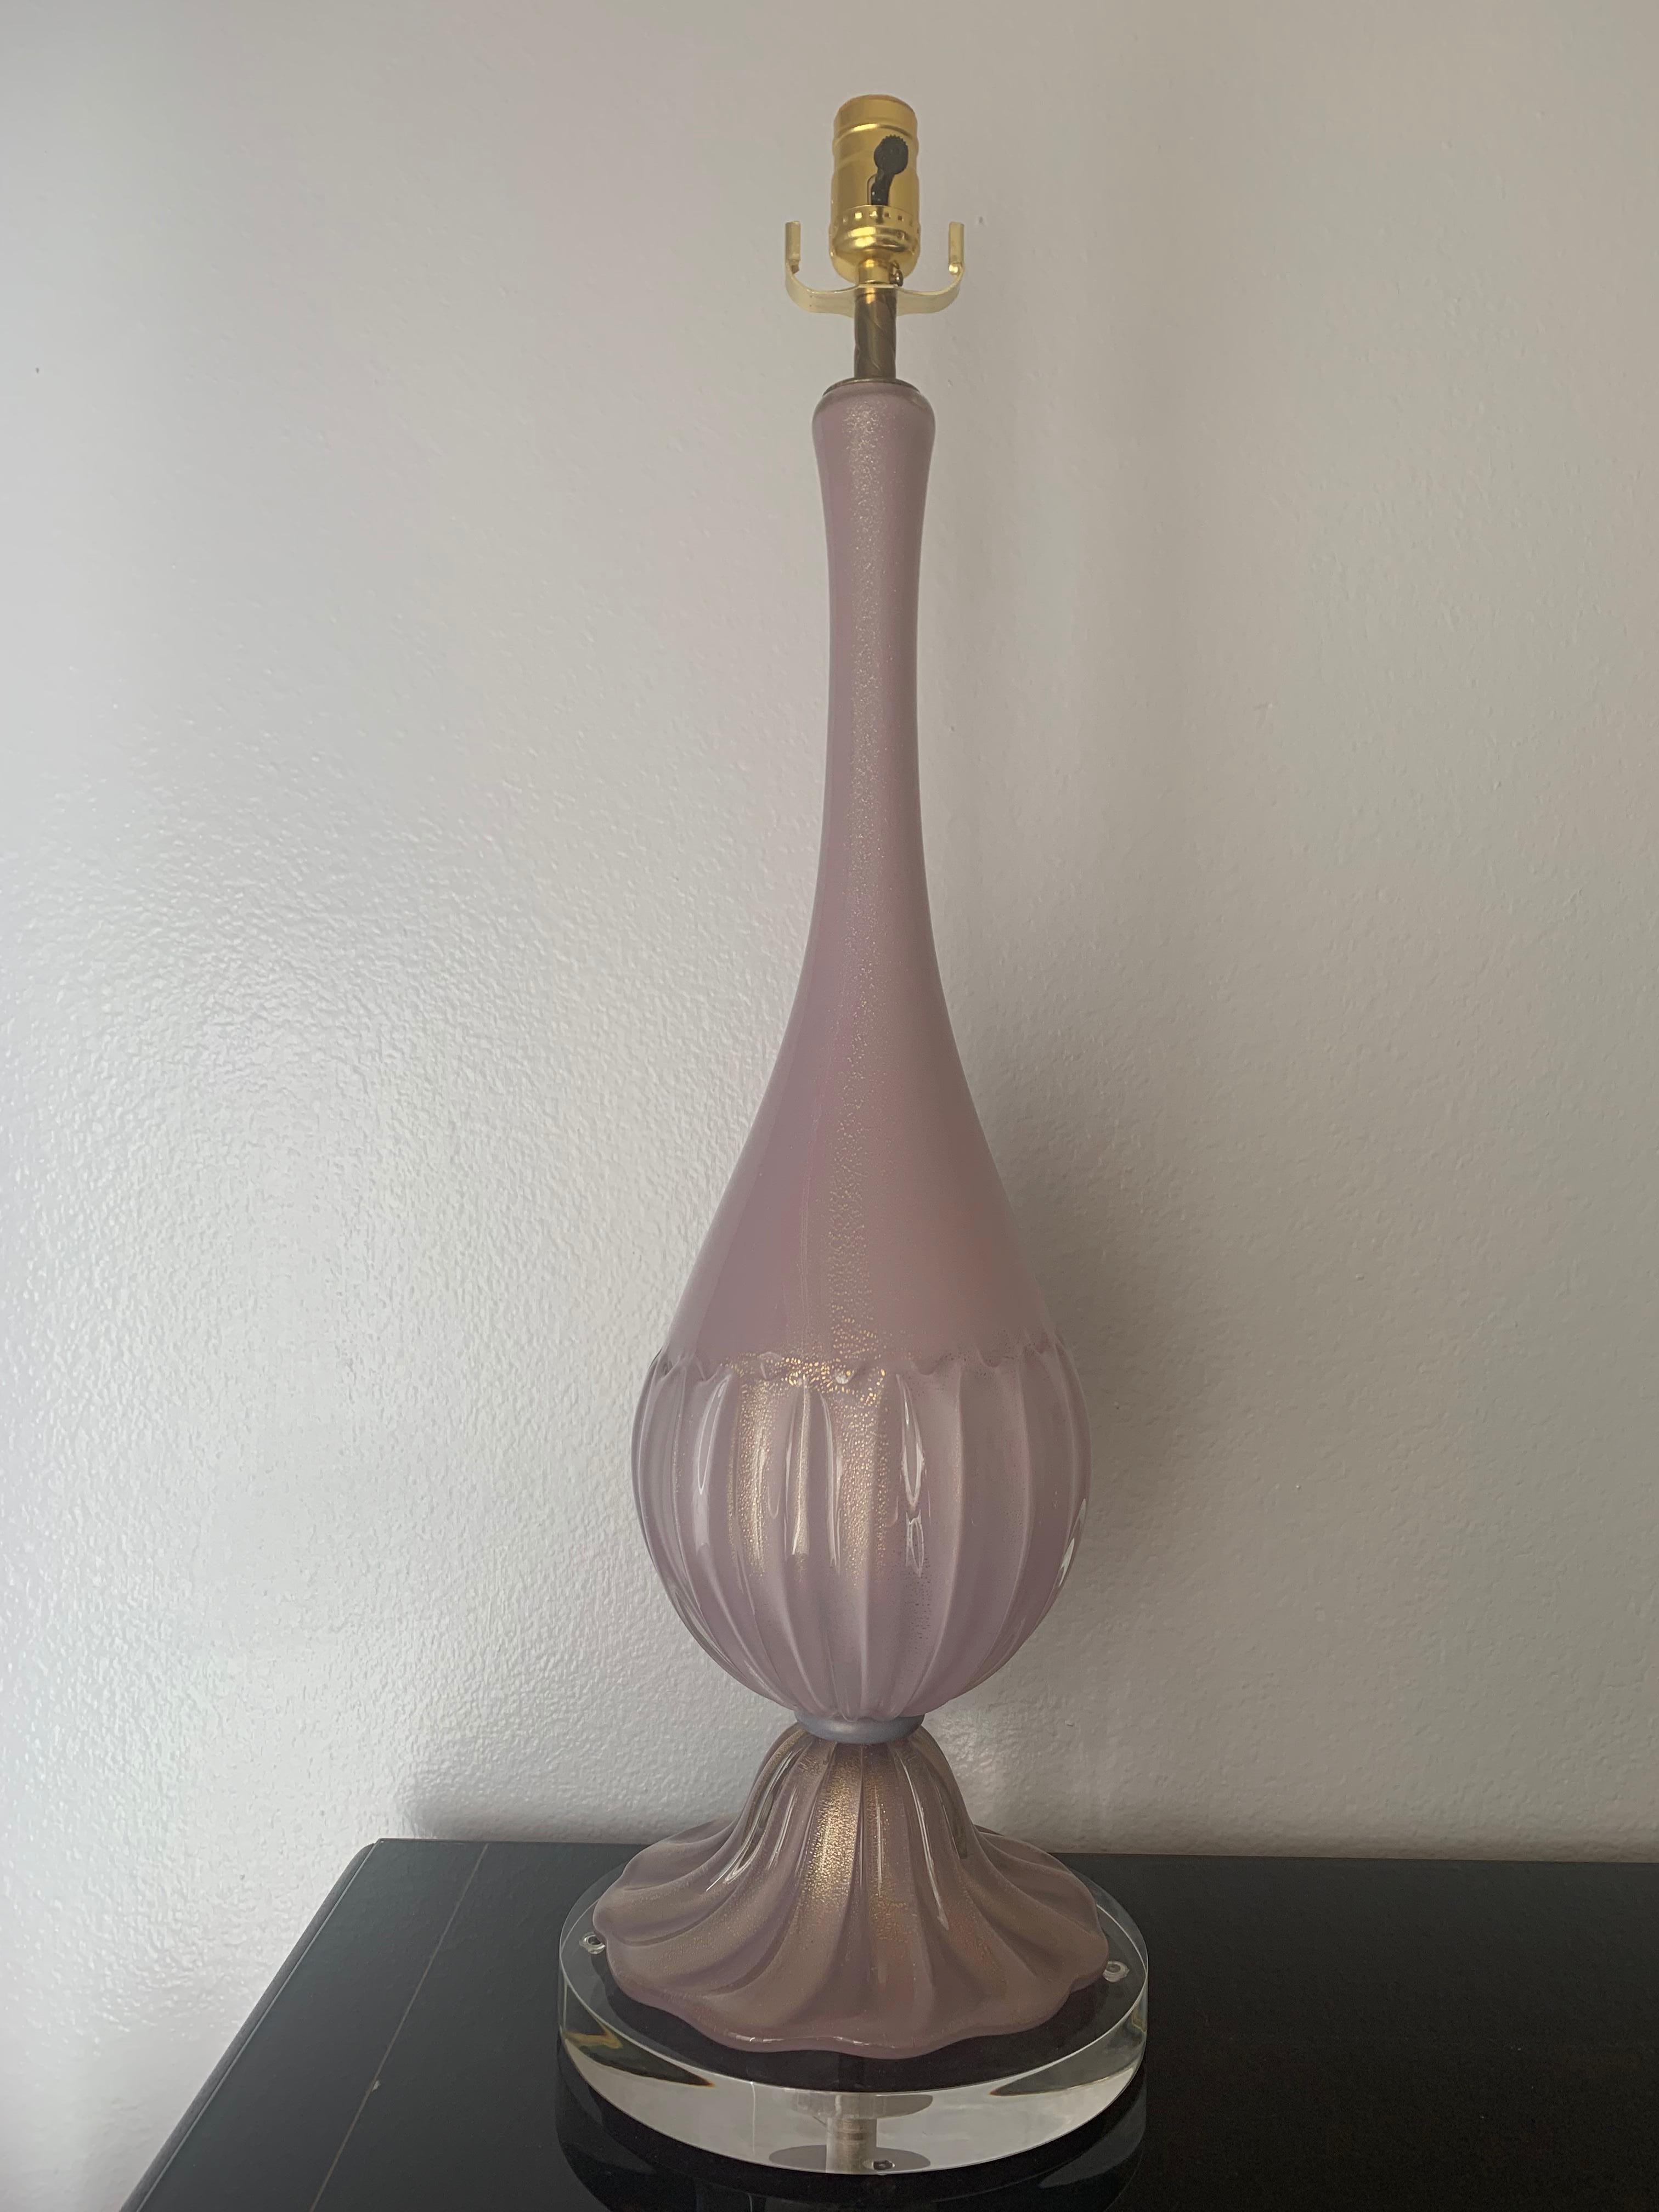 Murano glass lamp in lilic color with gold flecks.